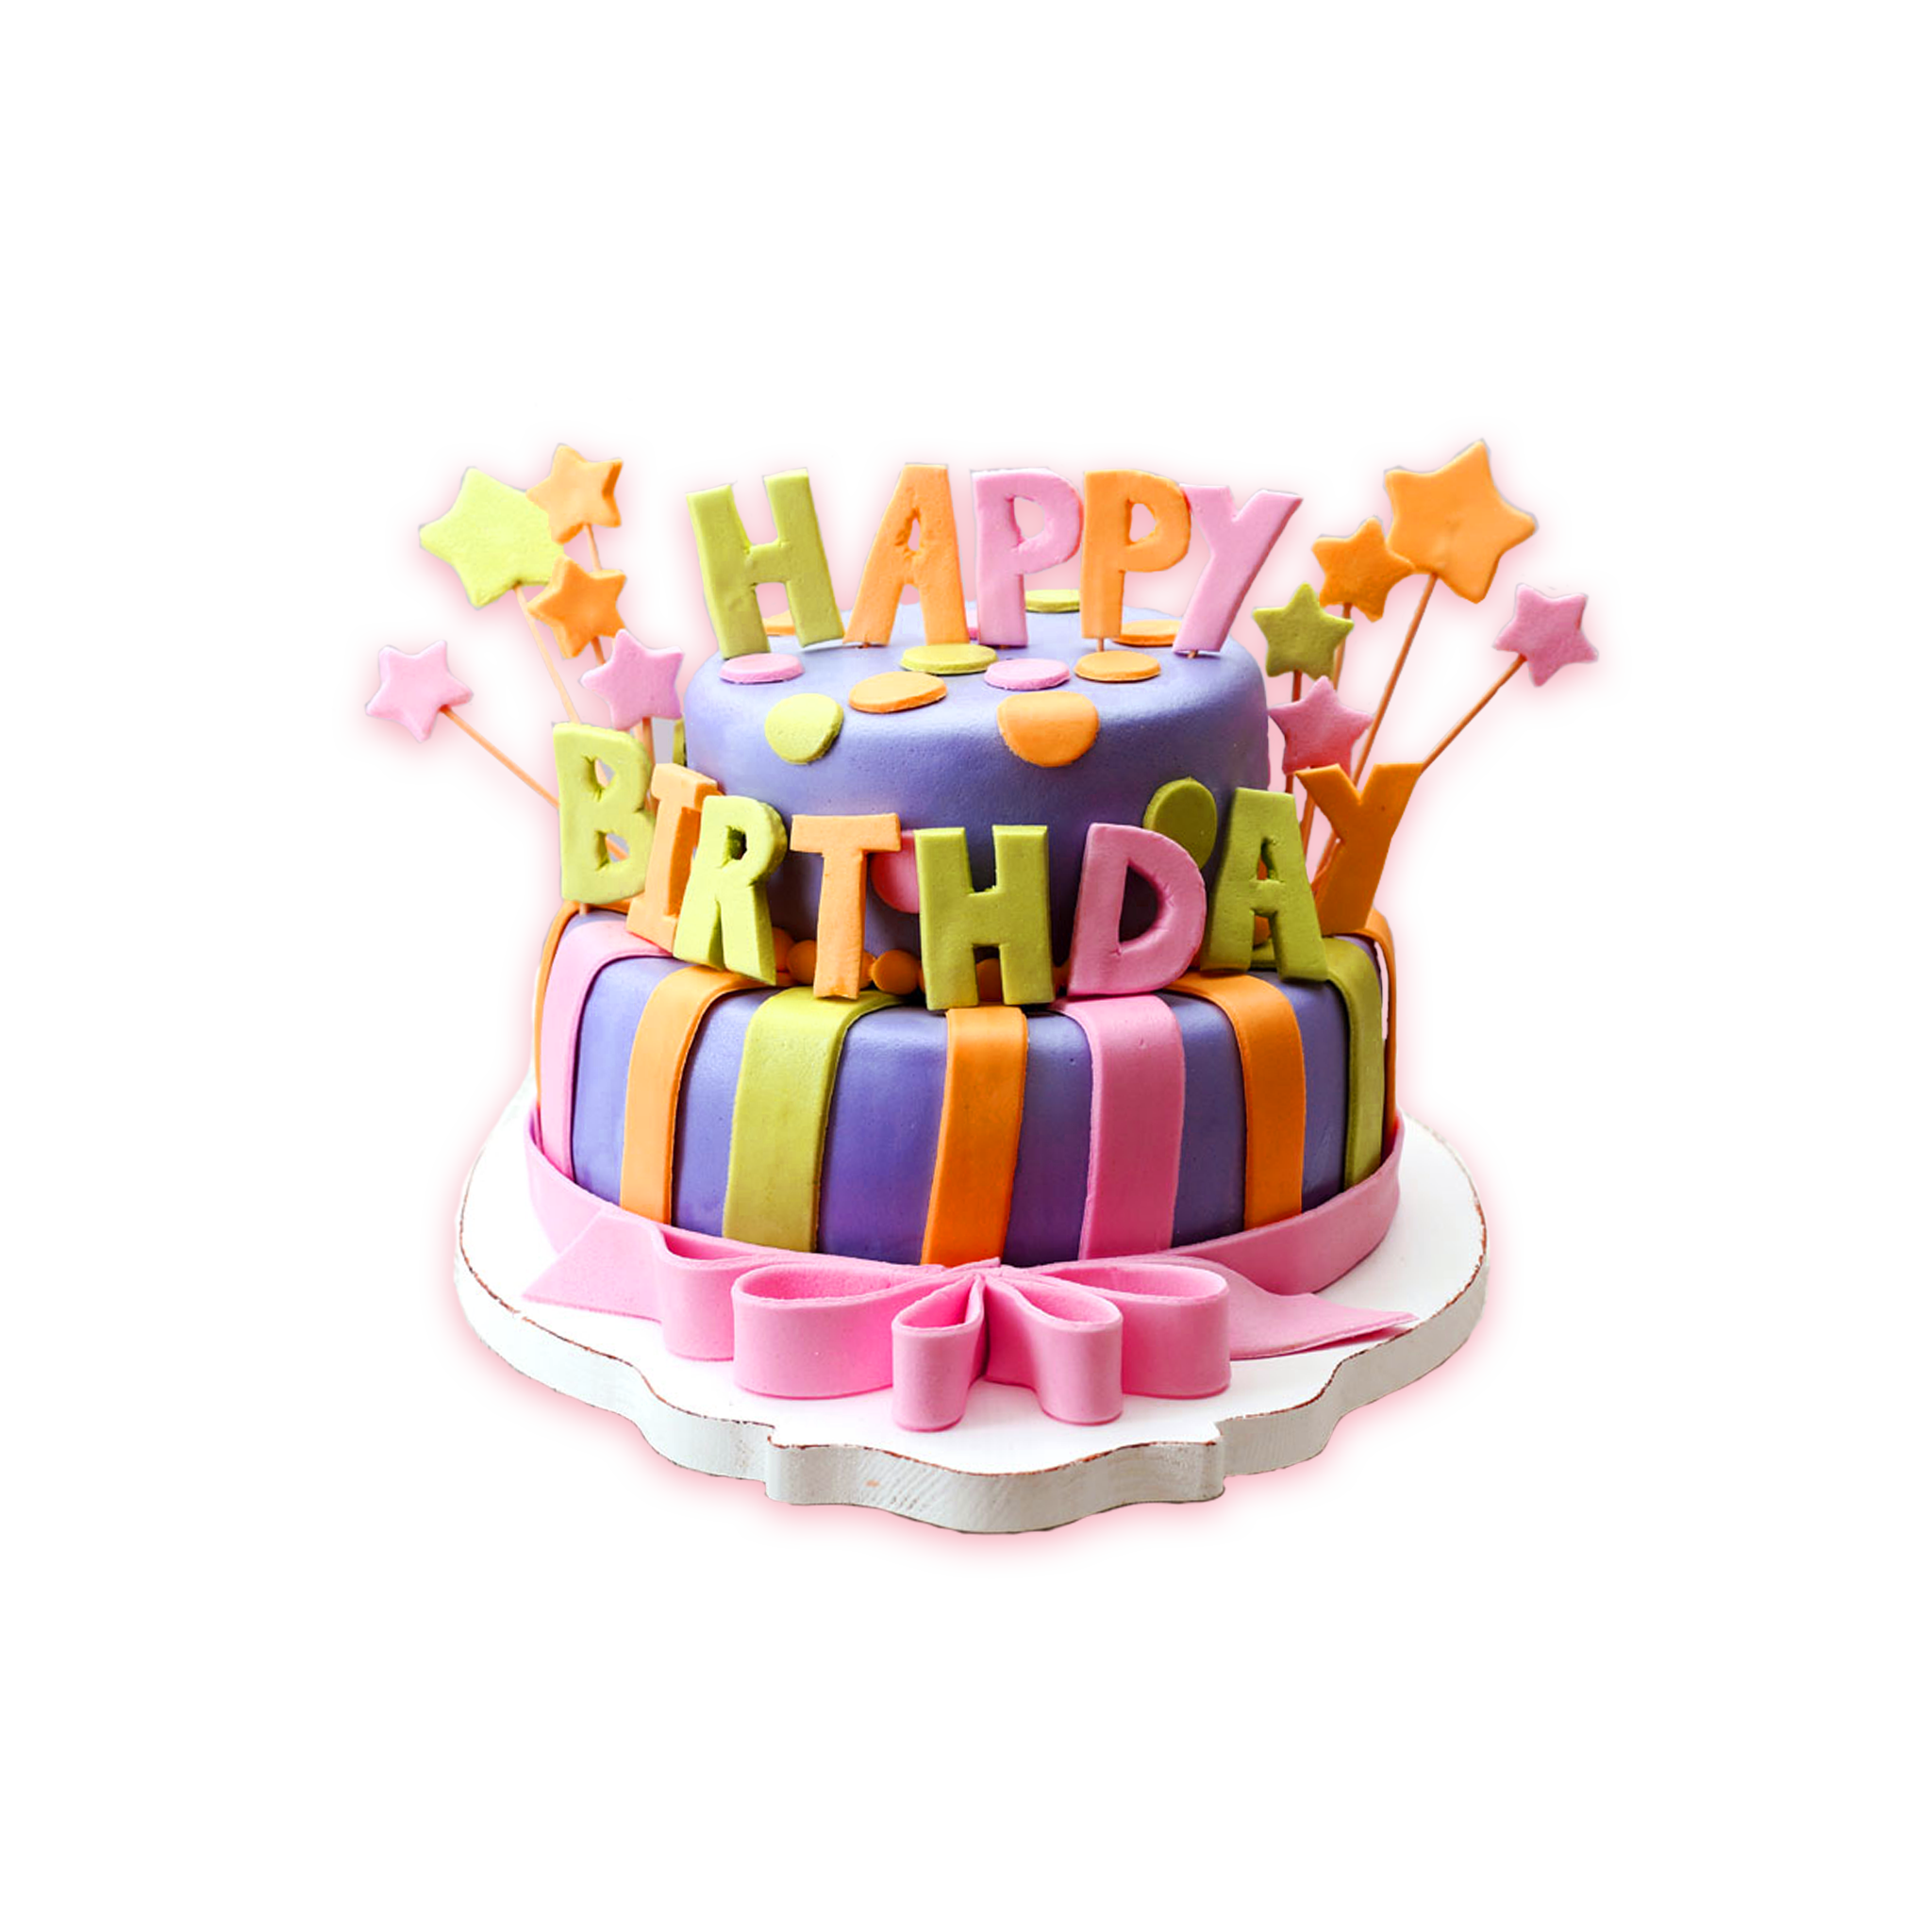 Cake with Candles PNG Clipart Image​ | Gallery Yopriceville - High-Quality  Free Images and Transparent PNG Clipart